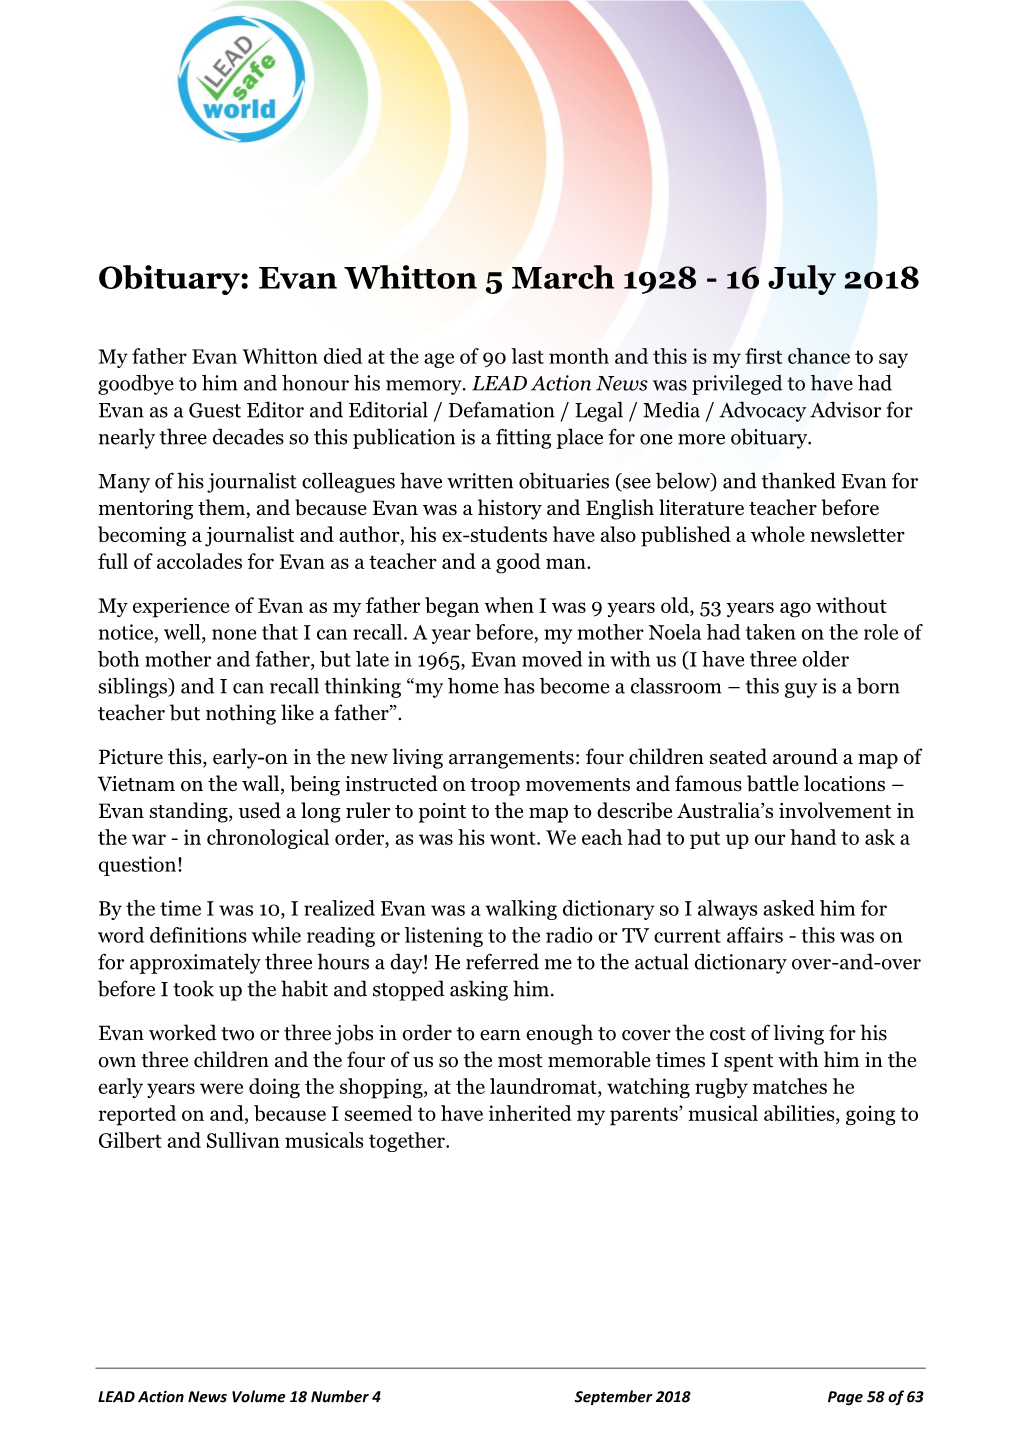 Obituary: Evan Whitton 5 March 1928 - 16 July 2018